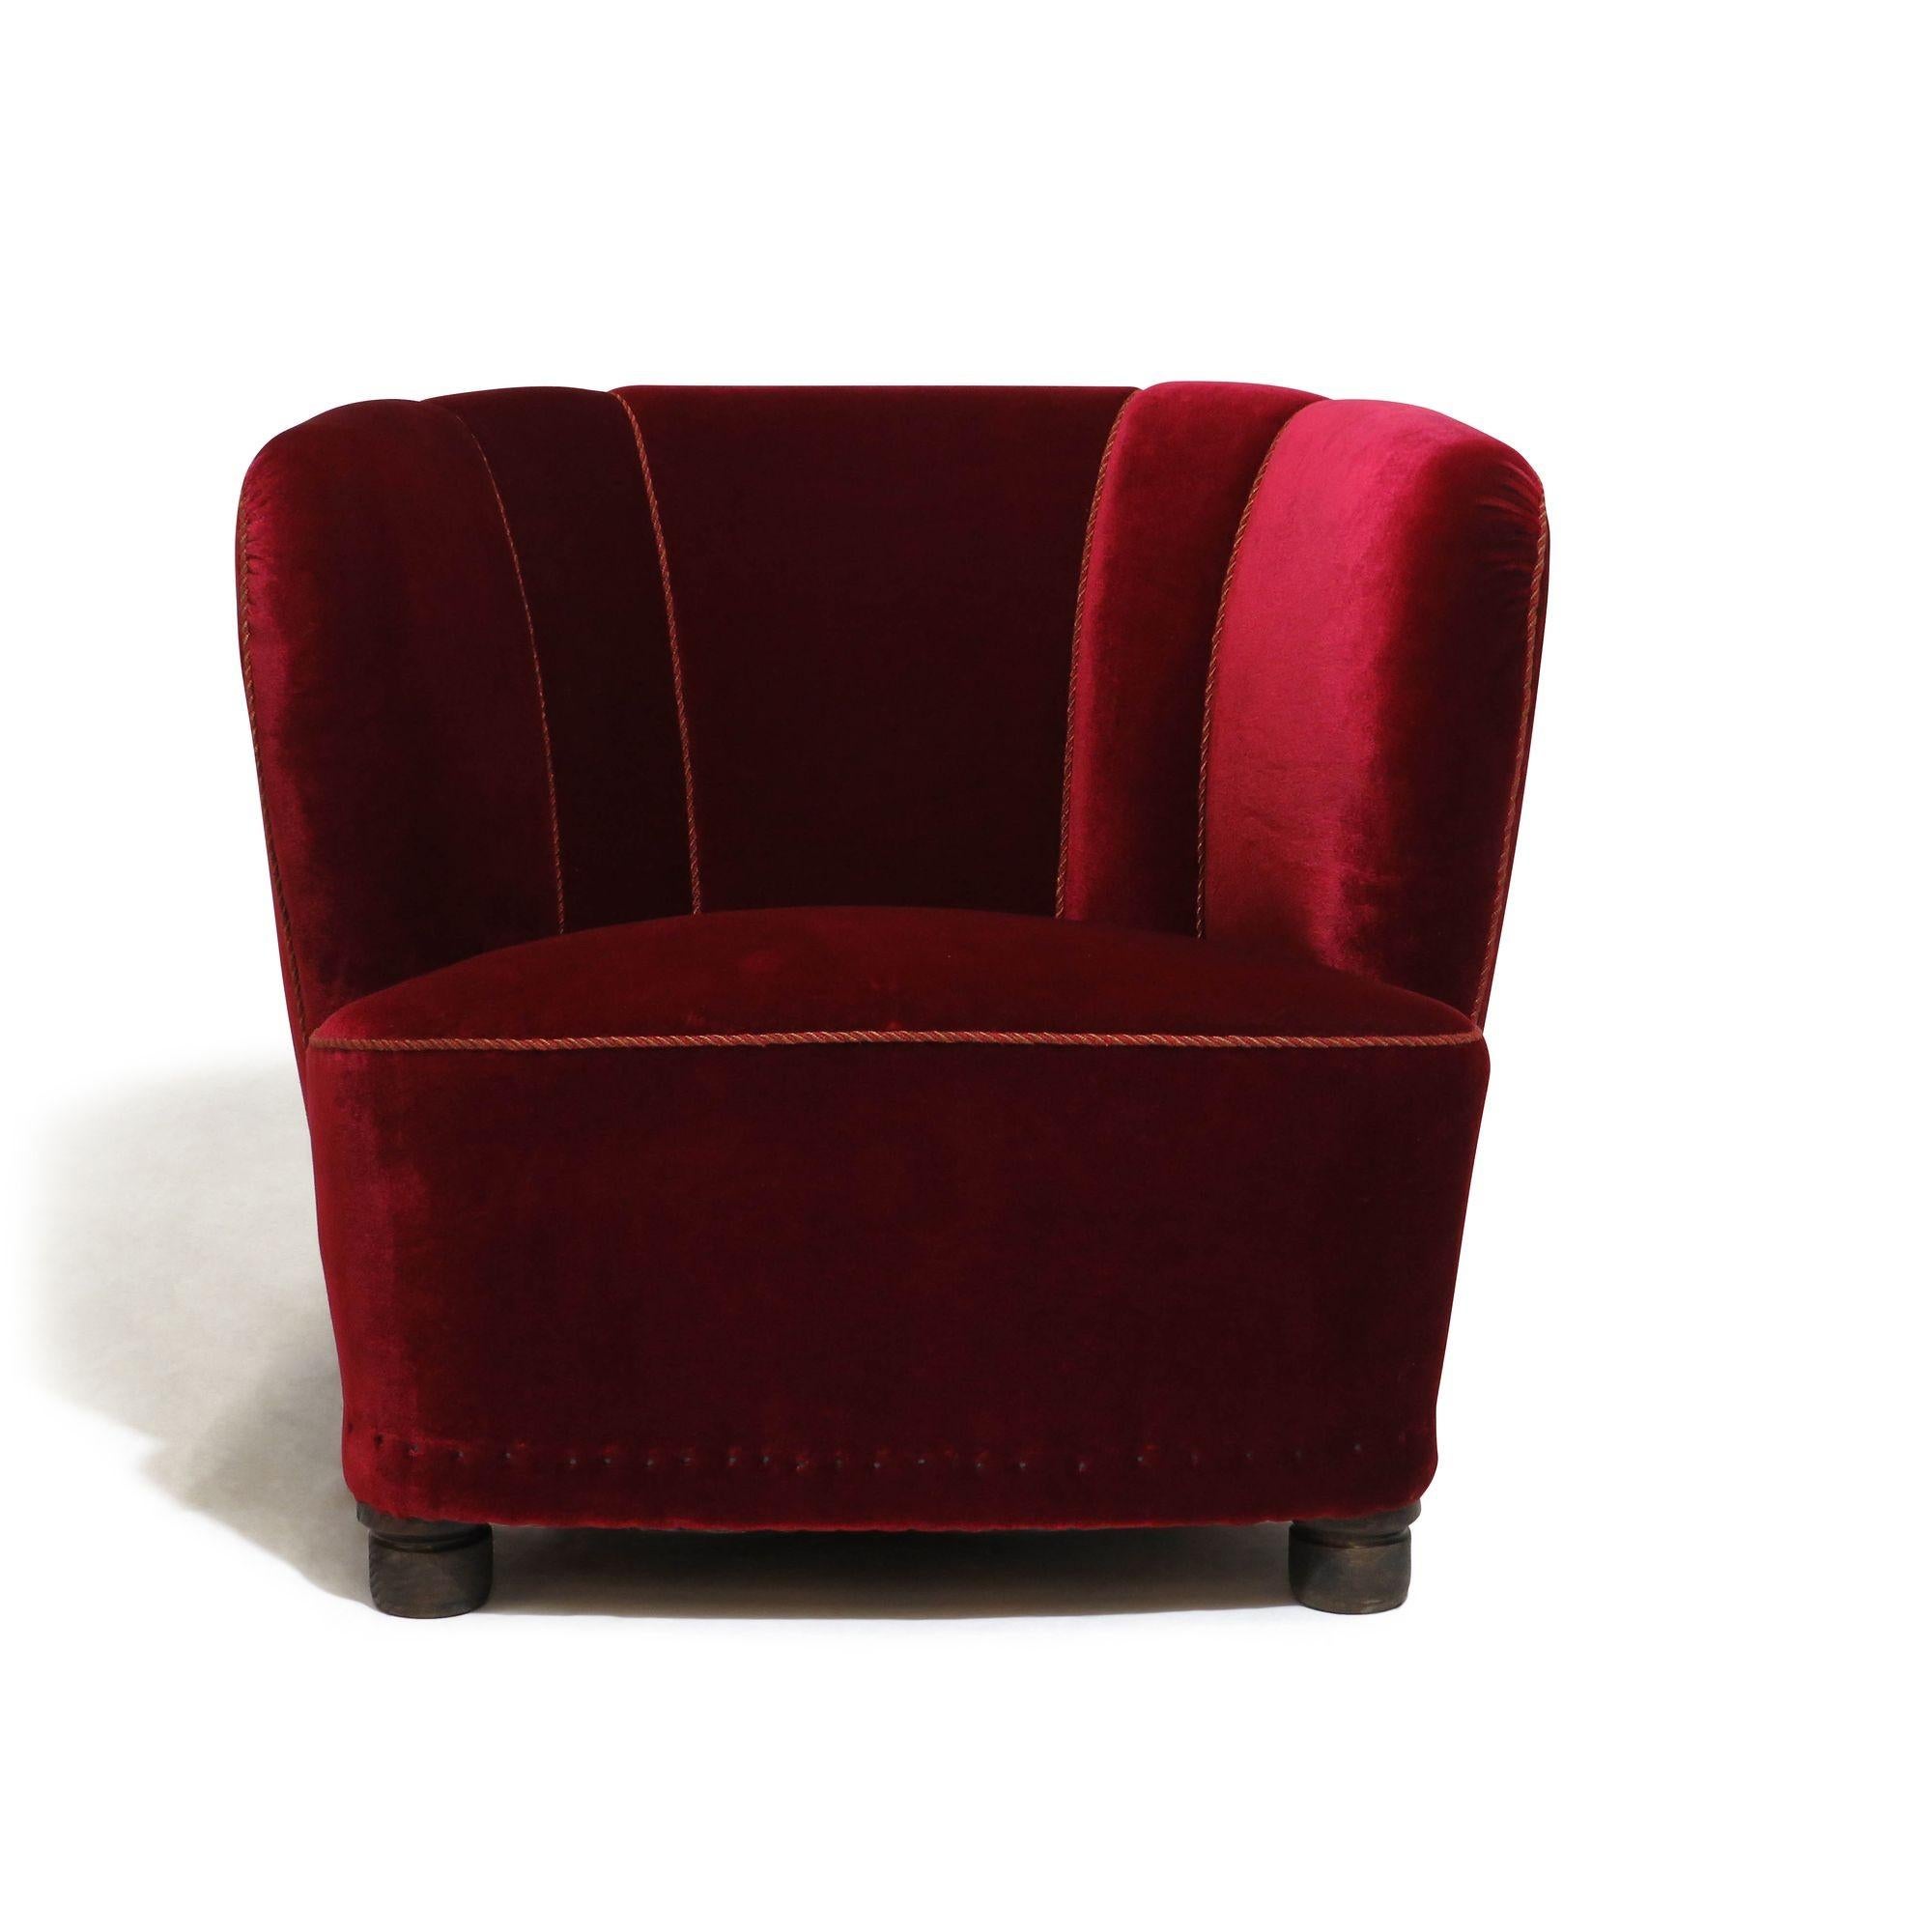 Danish channel back lounge chairs, circa 1930 Denmark, handcrafted of a solid wood frame with eight-way hand-tied copper springs, horsehair and cotton, covered in the original red mohair fabric, raised on stained beech legs. The chairs can be used